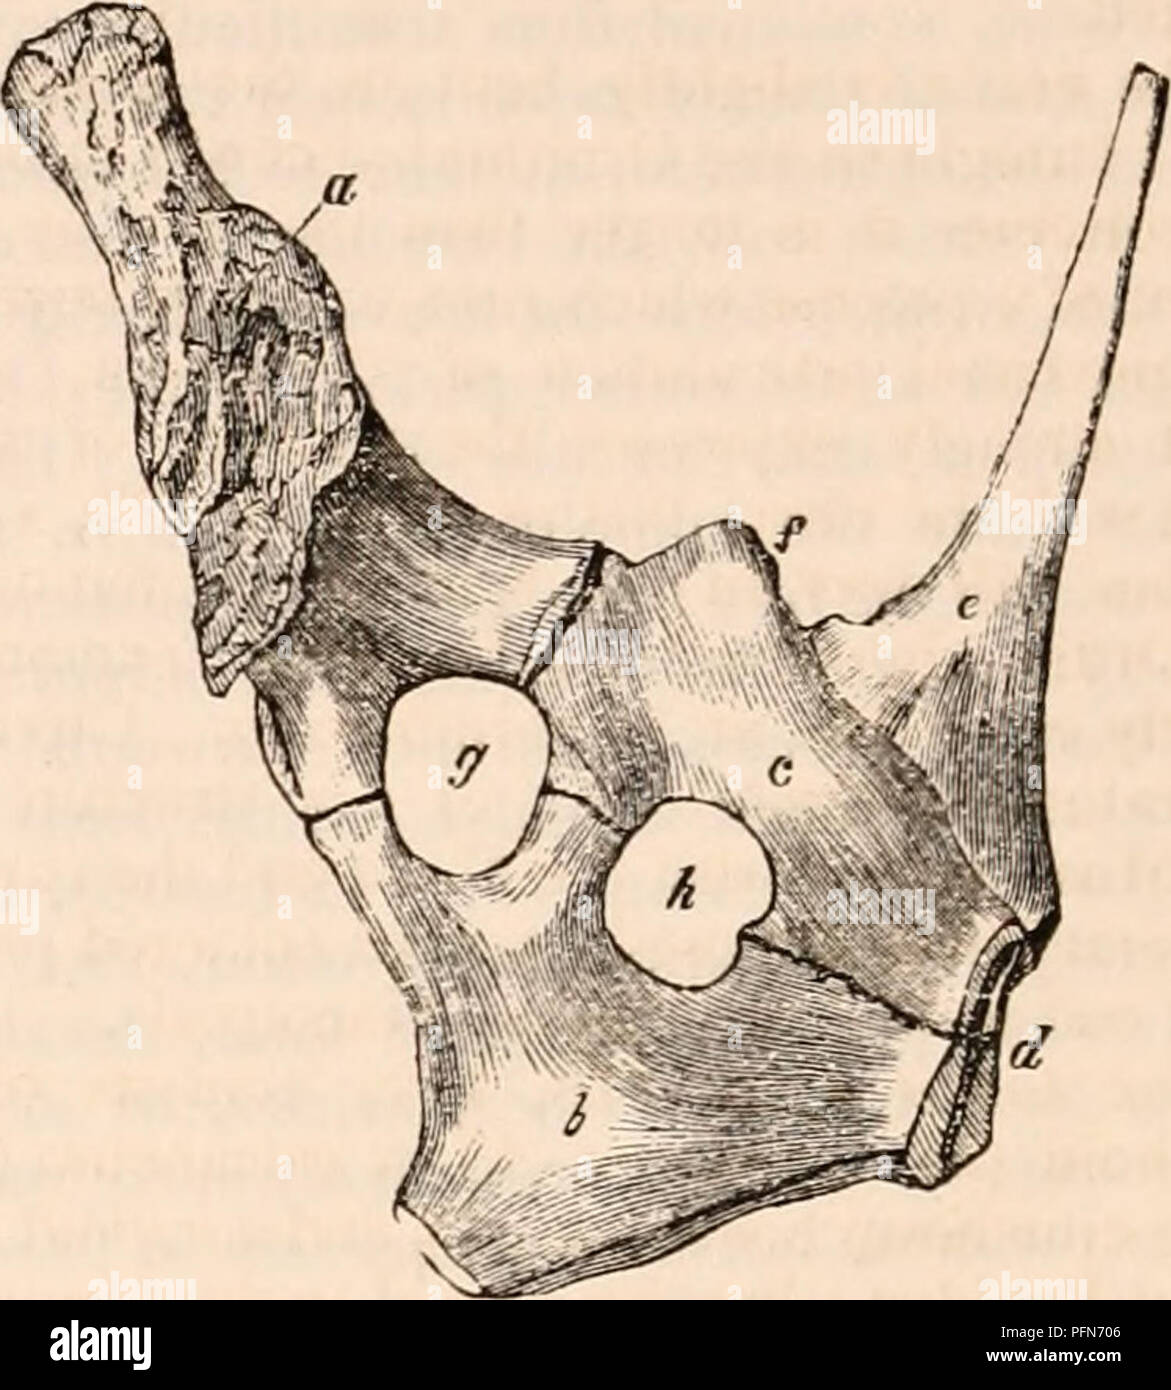 The cyclopædia of anatomy and physiology. Anatomy; Physiology; Zoology. in  the Ornithorhynchus; the pelvis of the Echidna resembles that of Birds in  the perfo- ration of the acetabulum (Jig. 177, g),